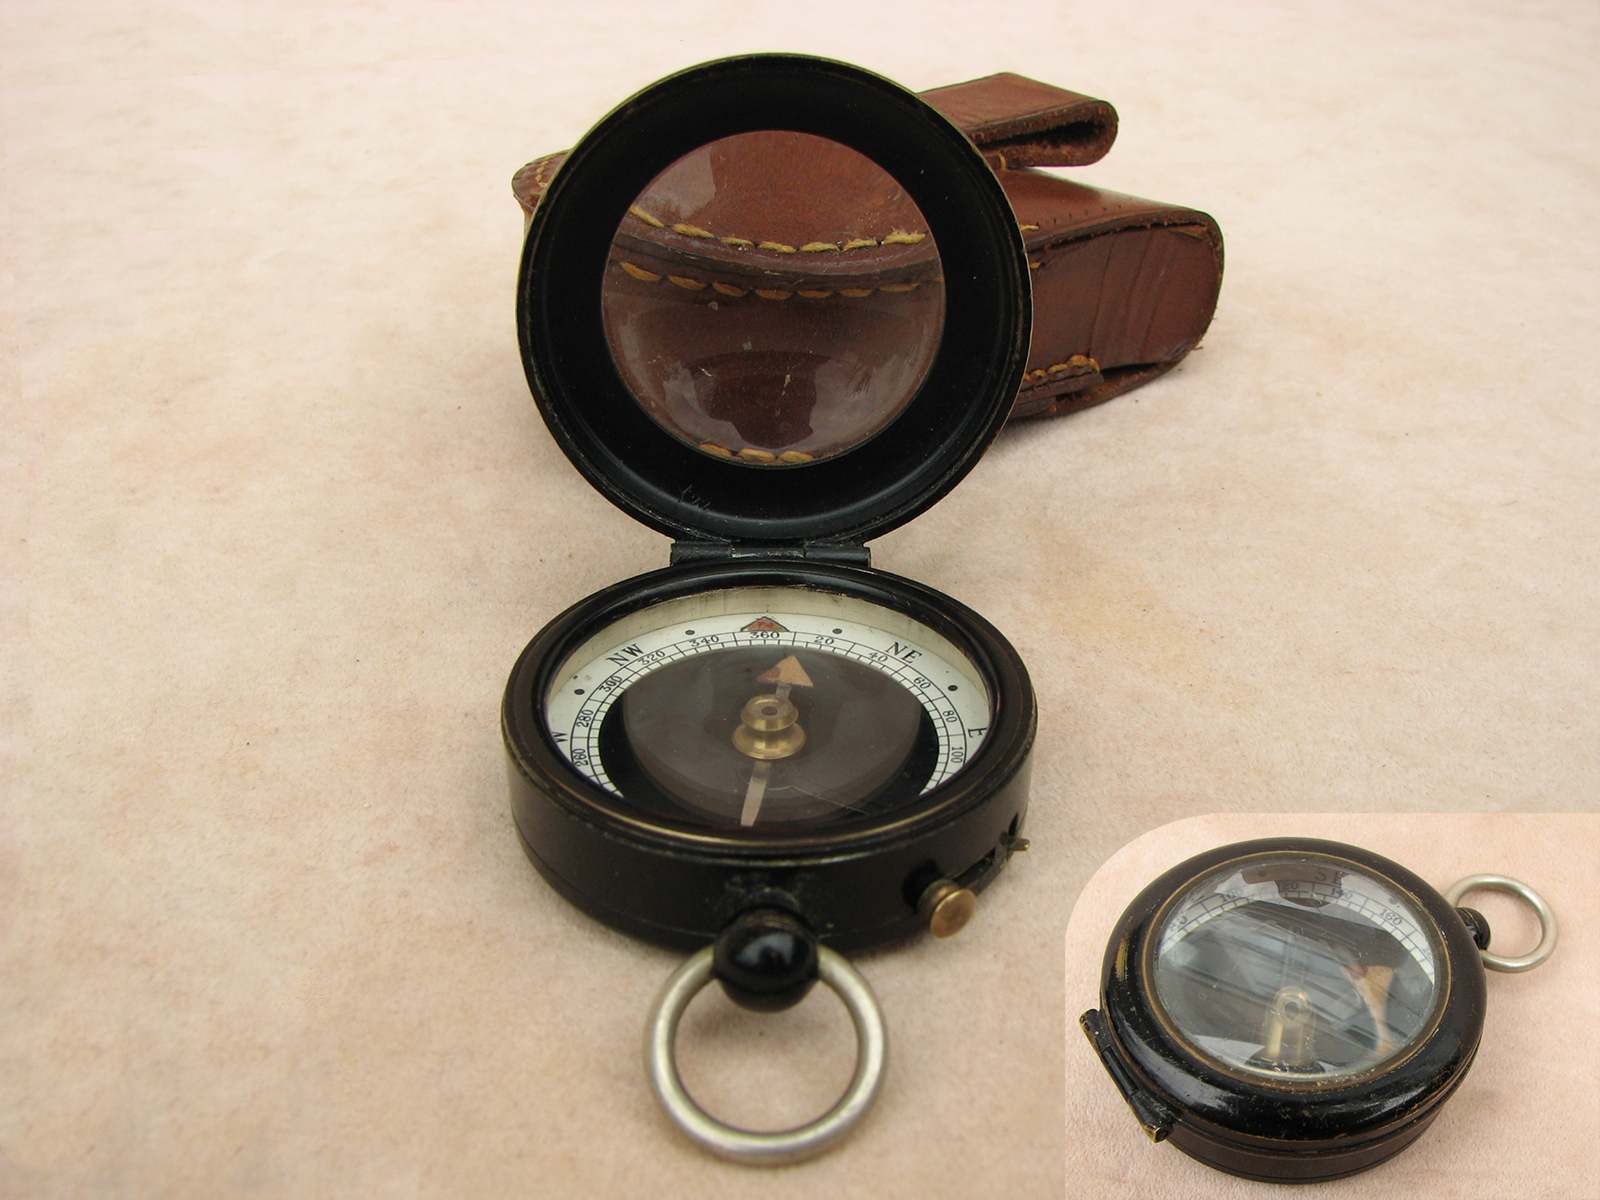 Rare Dollond 'Prospecting Compass' with Barker patent no 12777